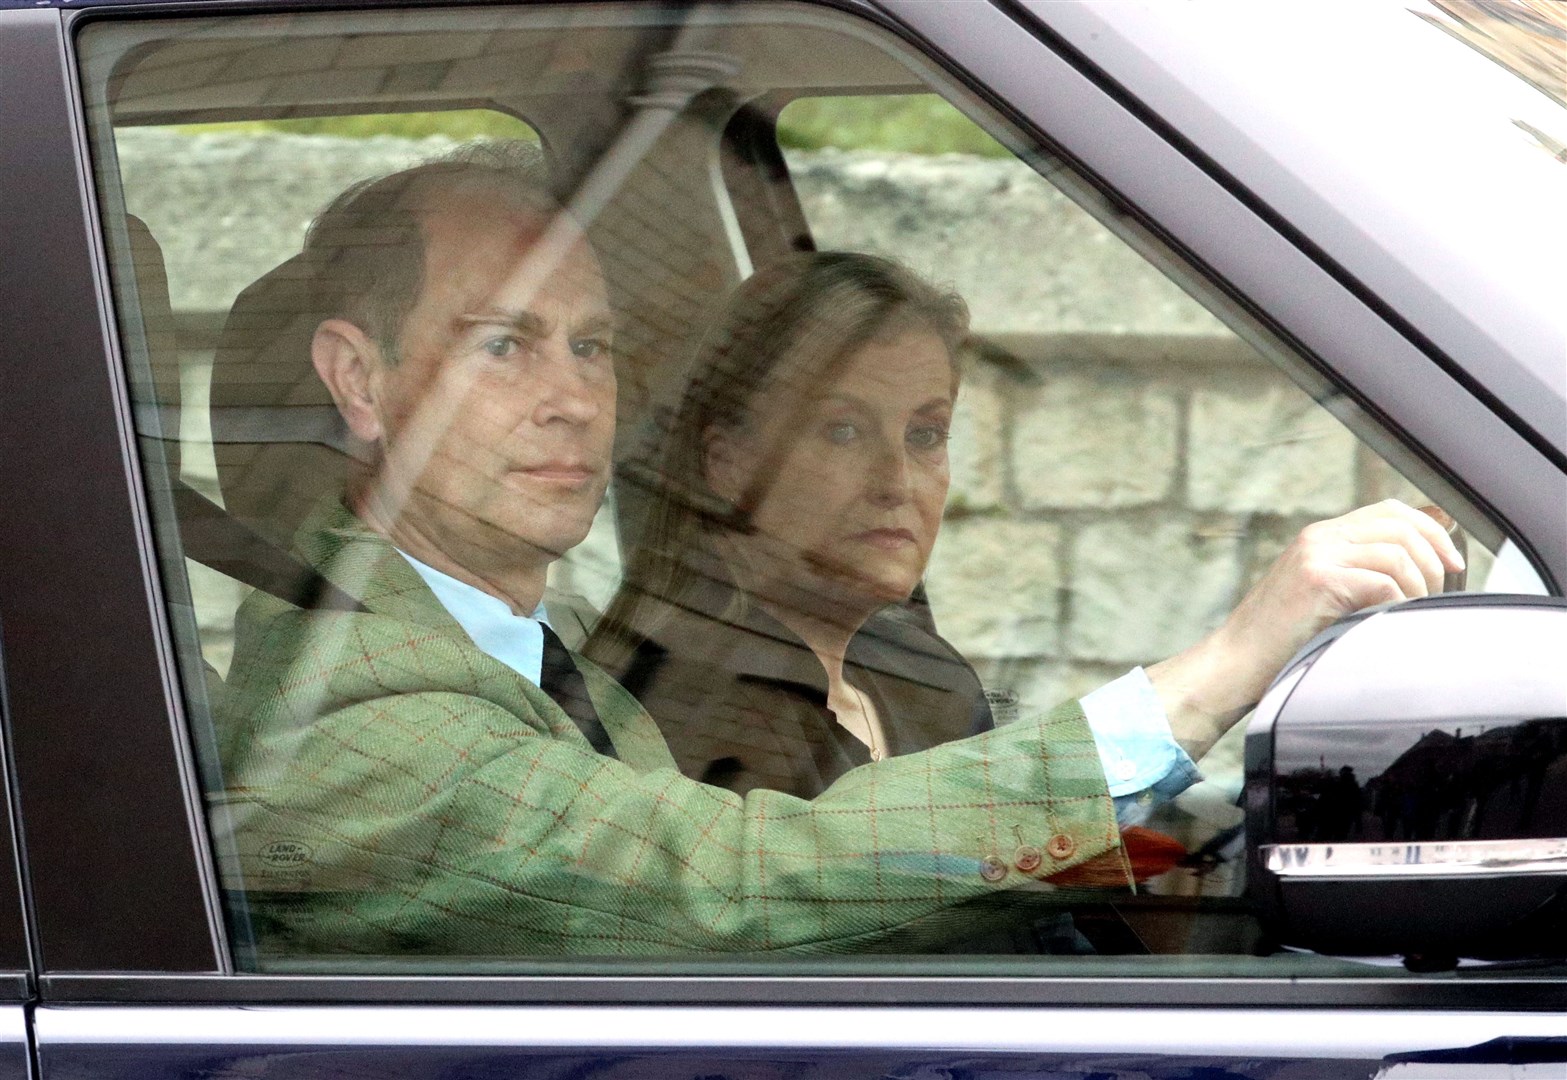 The Earl and Countess of Wessex arrived at Windsor Castle to see the Queen (Steve Parsons/AP